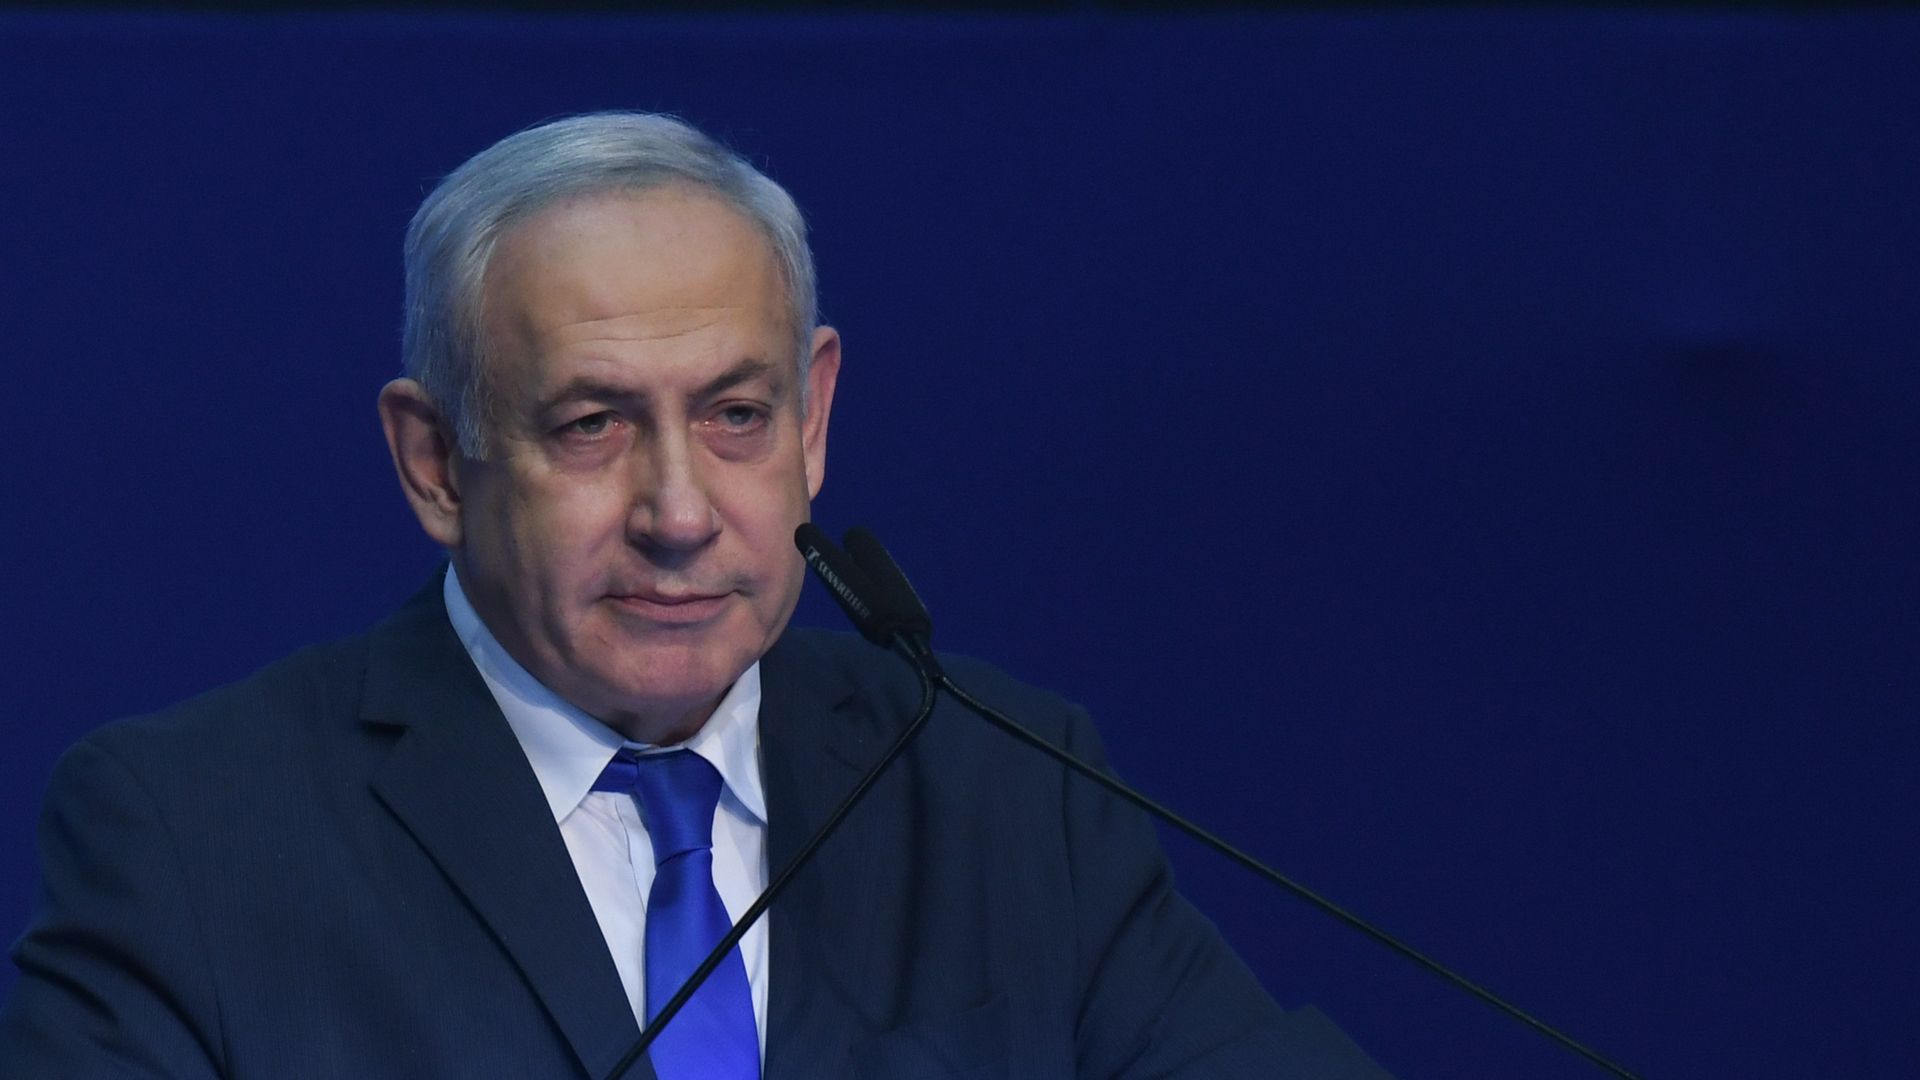  Israeli Prime Minister Benjamin Netanyahu during his address to supporters